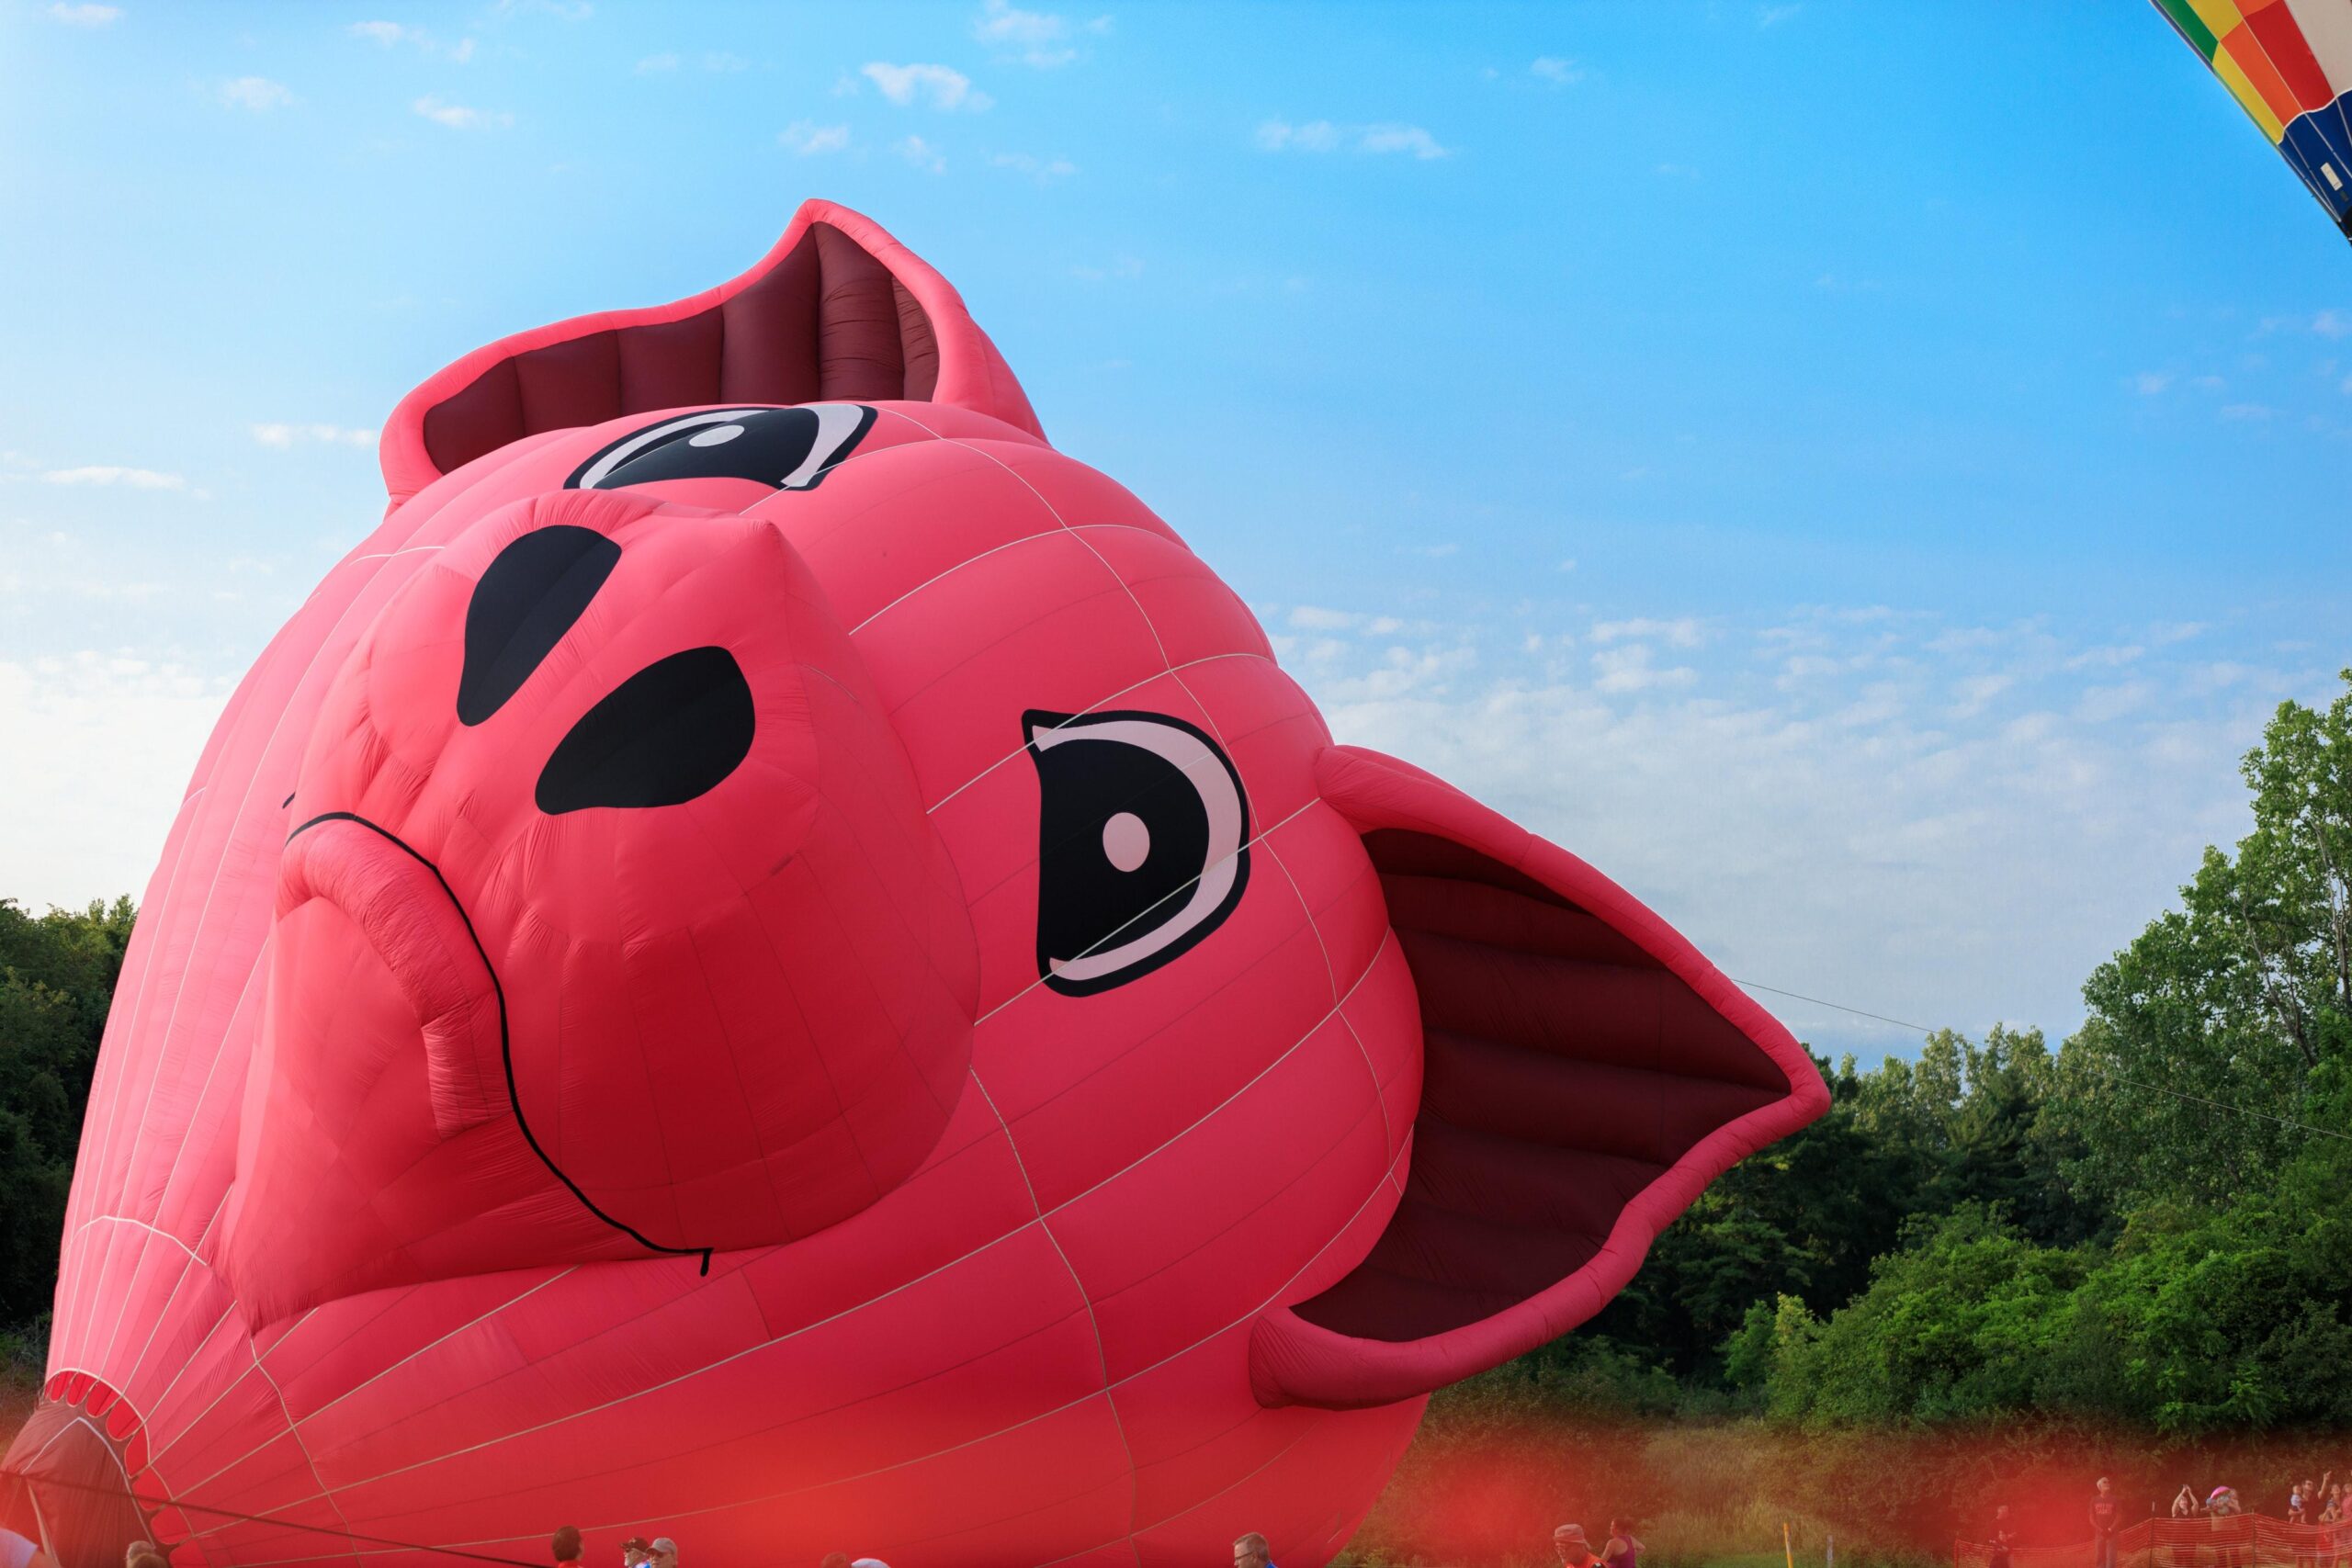 The Advantages Of Using Custom Advertising Inflatables For Your Brand Promotion